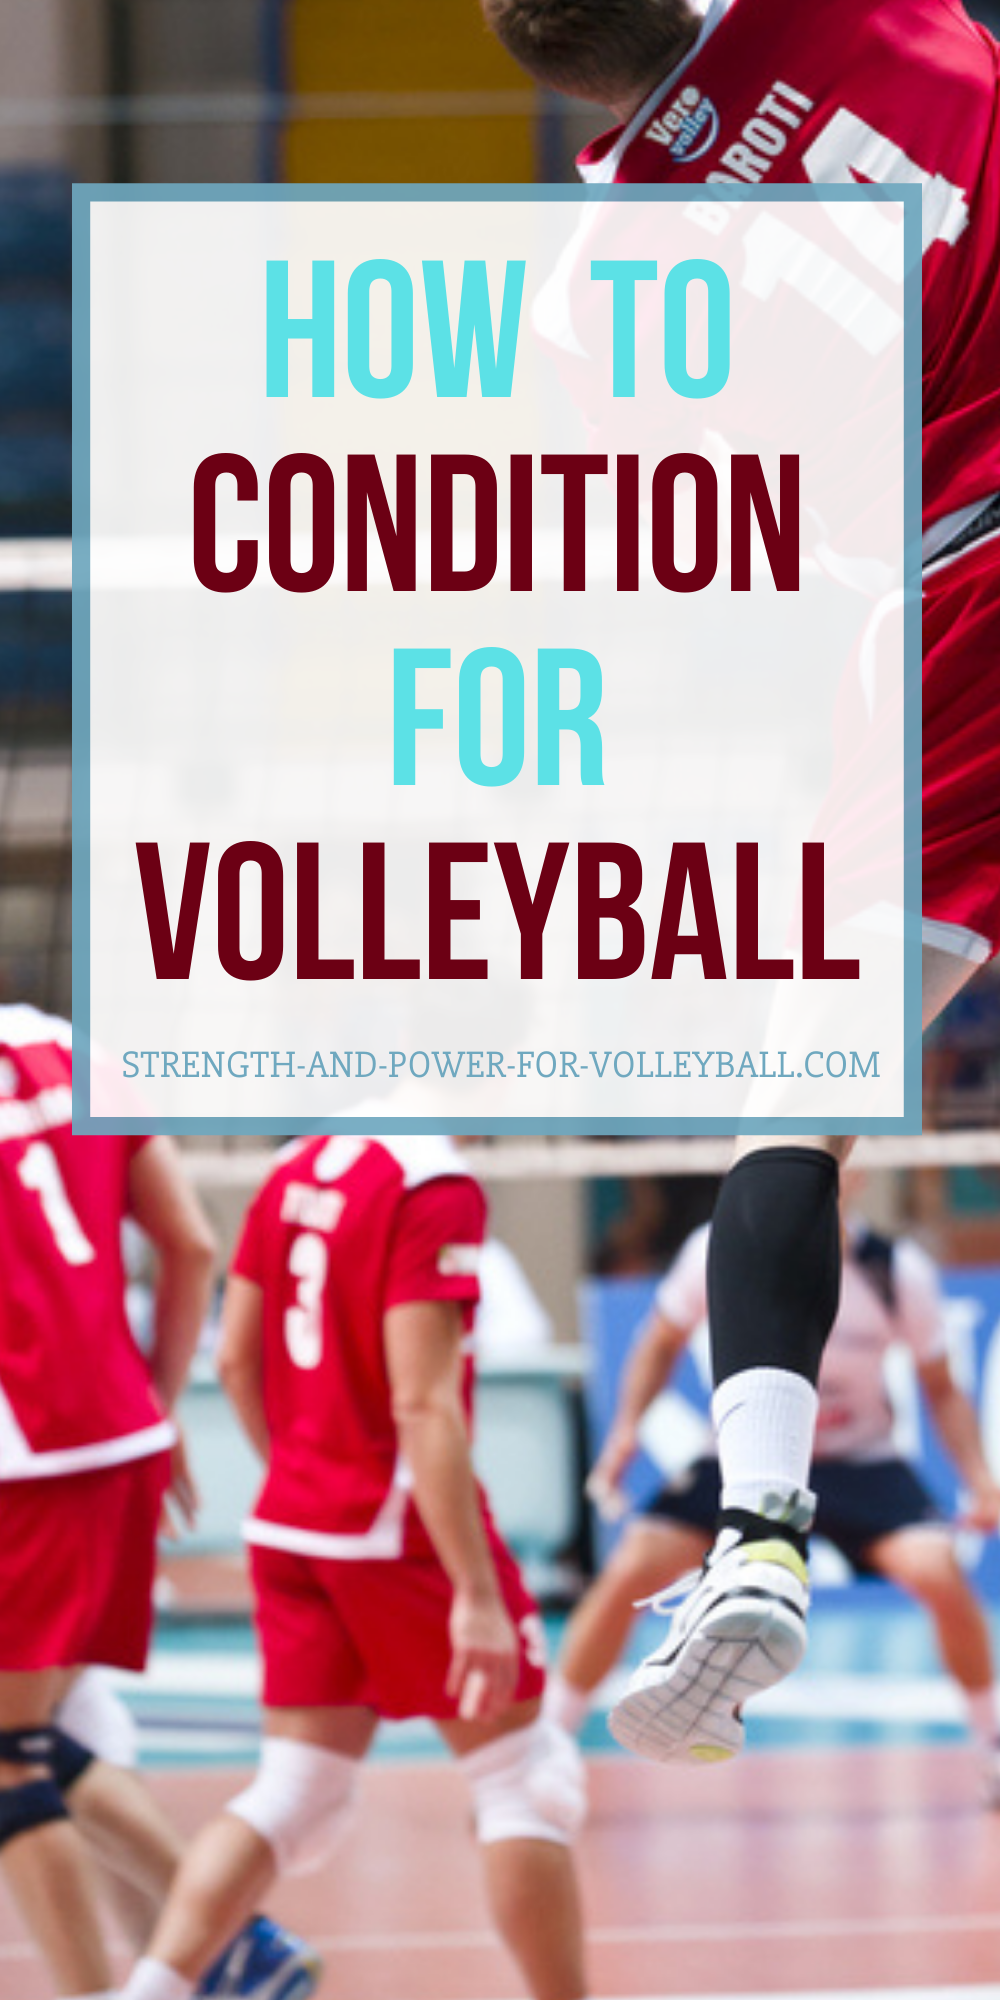 Conditioning for Volleyball Tips